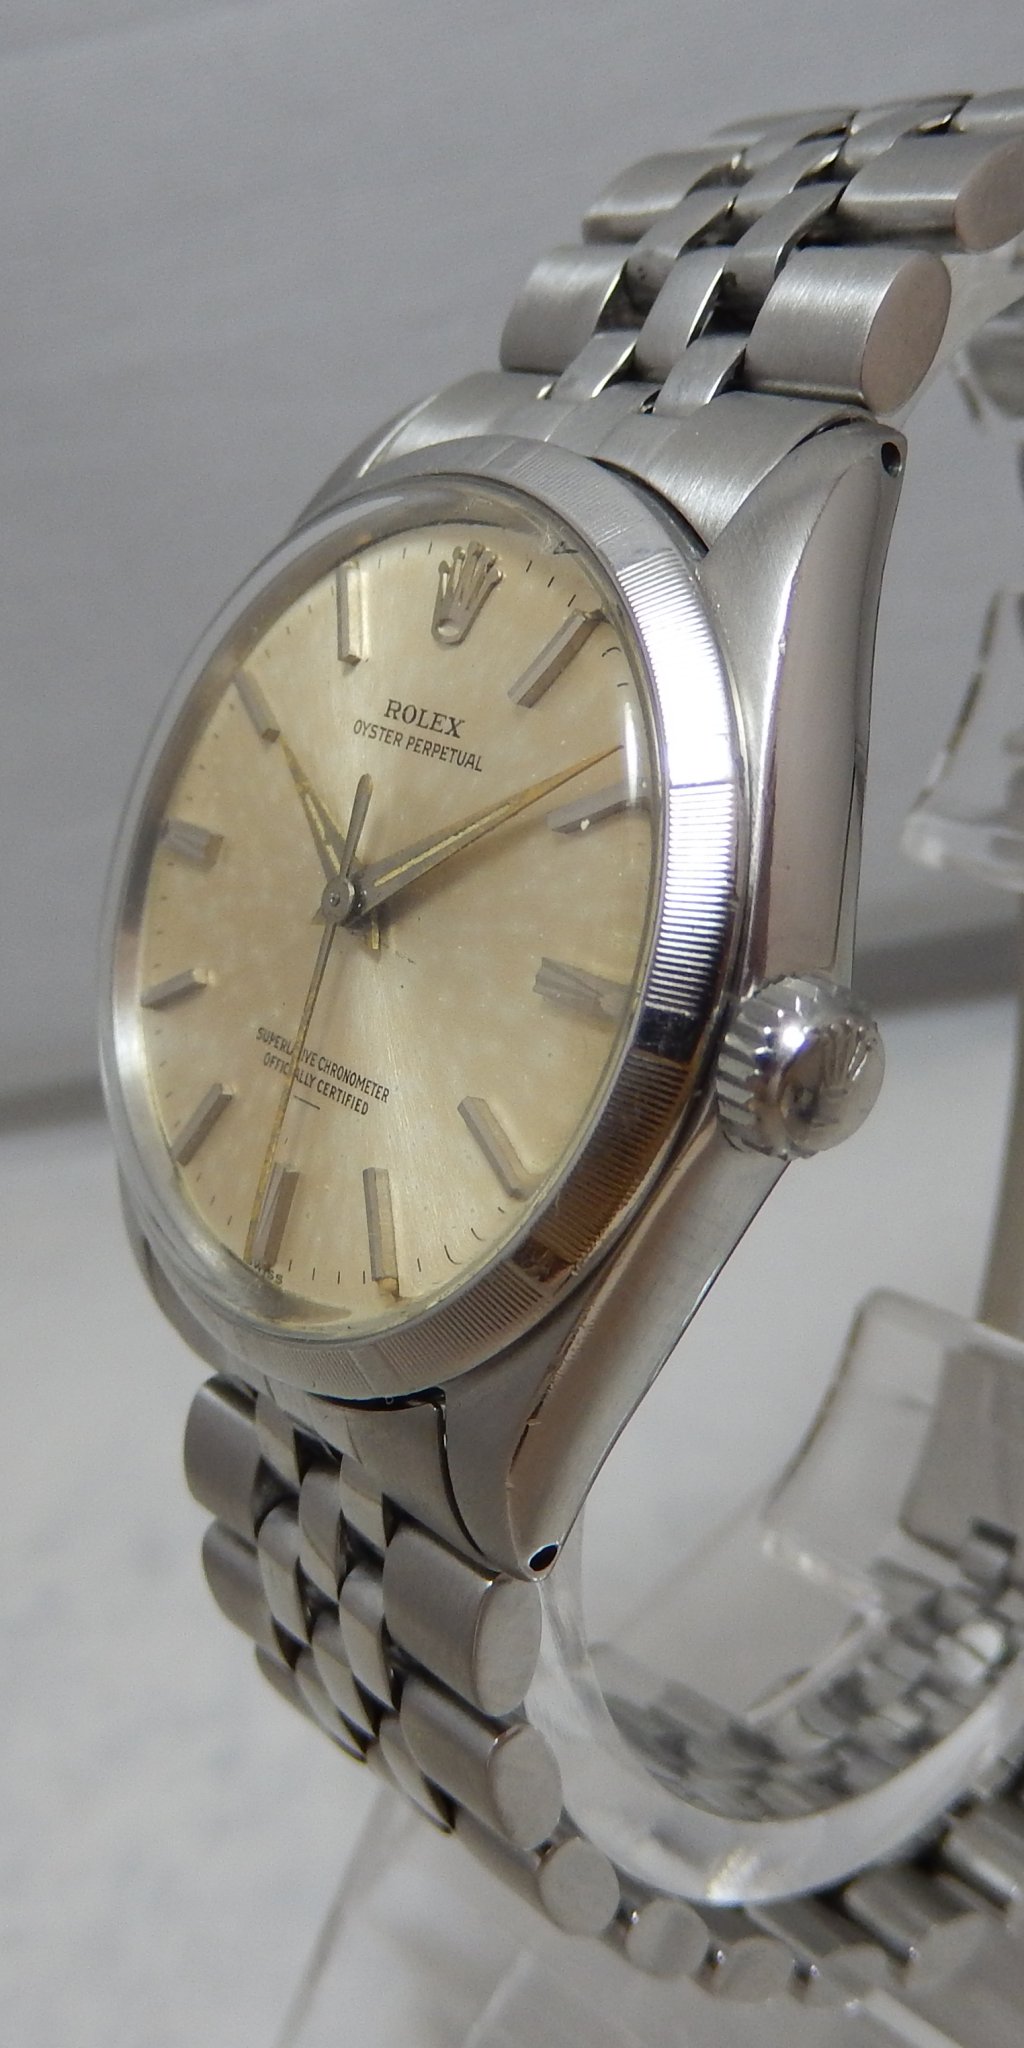 Rolex Oyster Perpetual Acero Inoxidable 